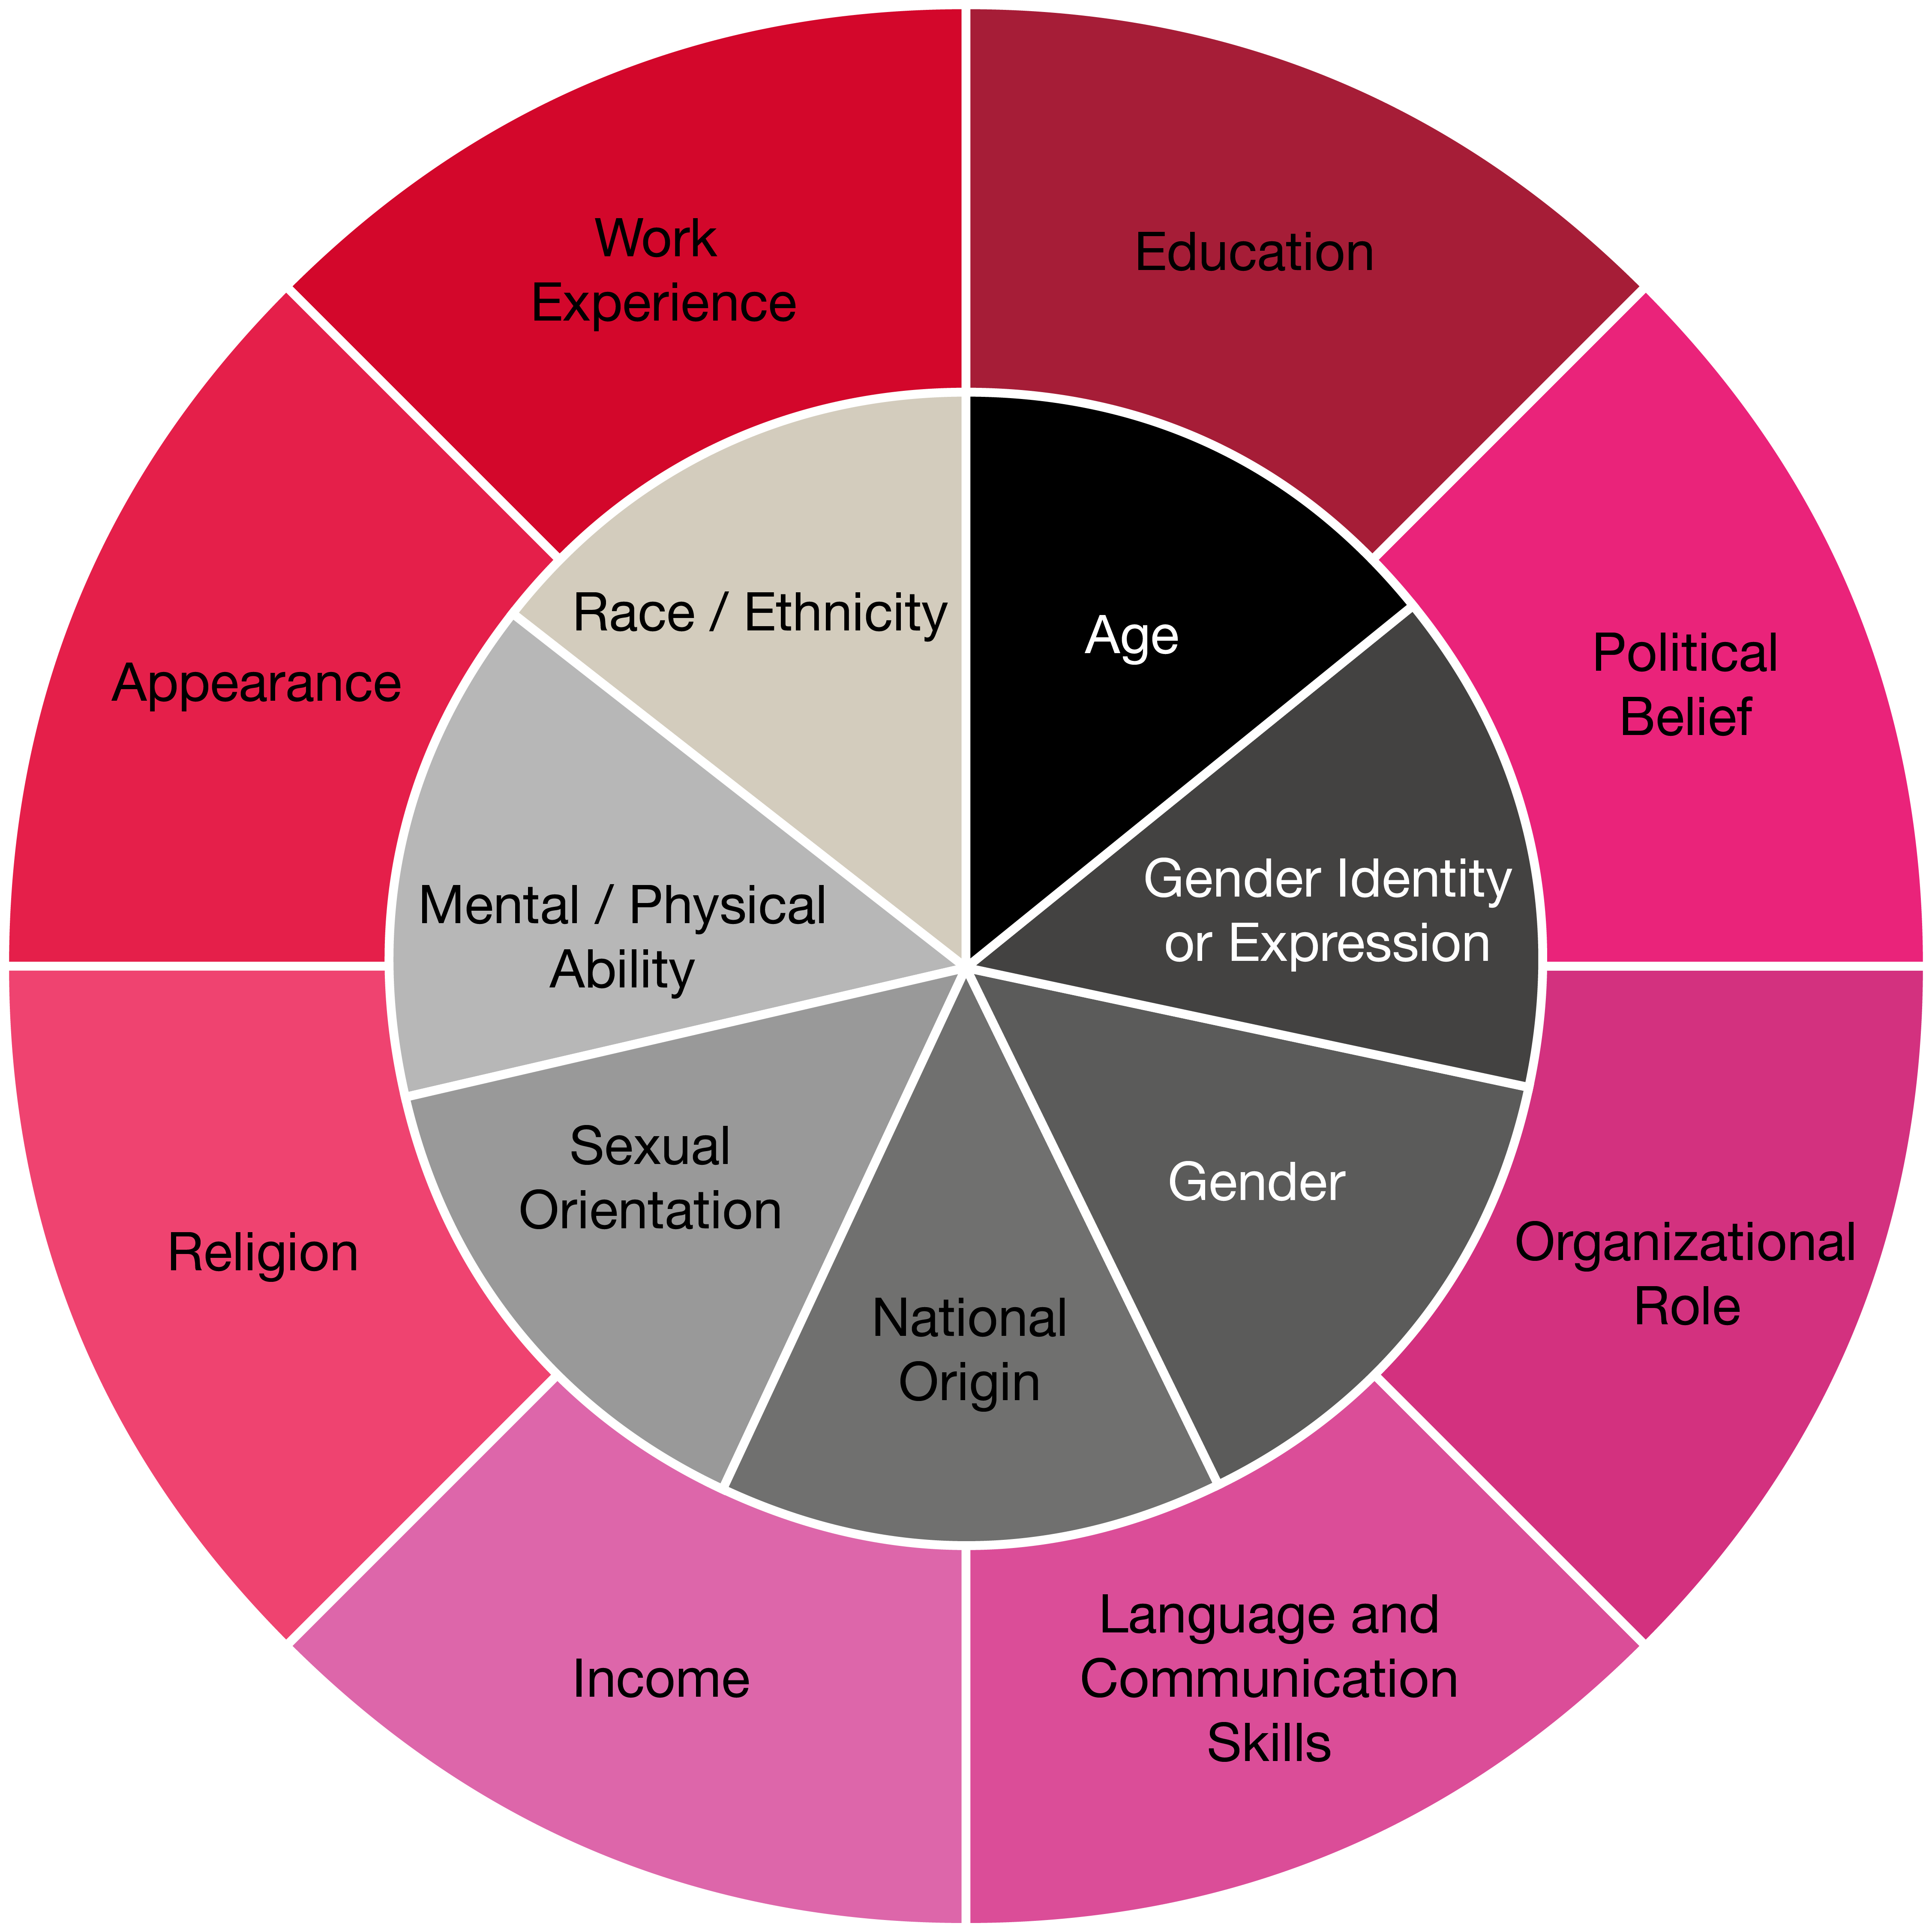 The Diversity Wheel focuses on specific aspects of race, ethnicity, age, gender, sexual orientation/gender identity, creed, national origin, mental/physical ability, socioeconomic status, work experience, education, political belief, organizational role, language/communication skills, and appearance.